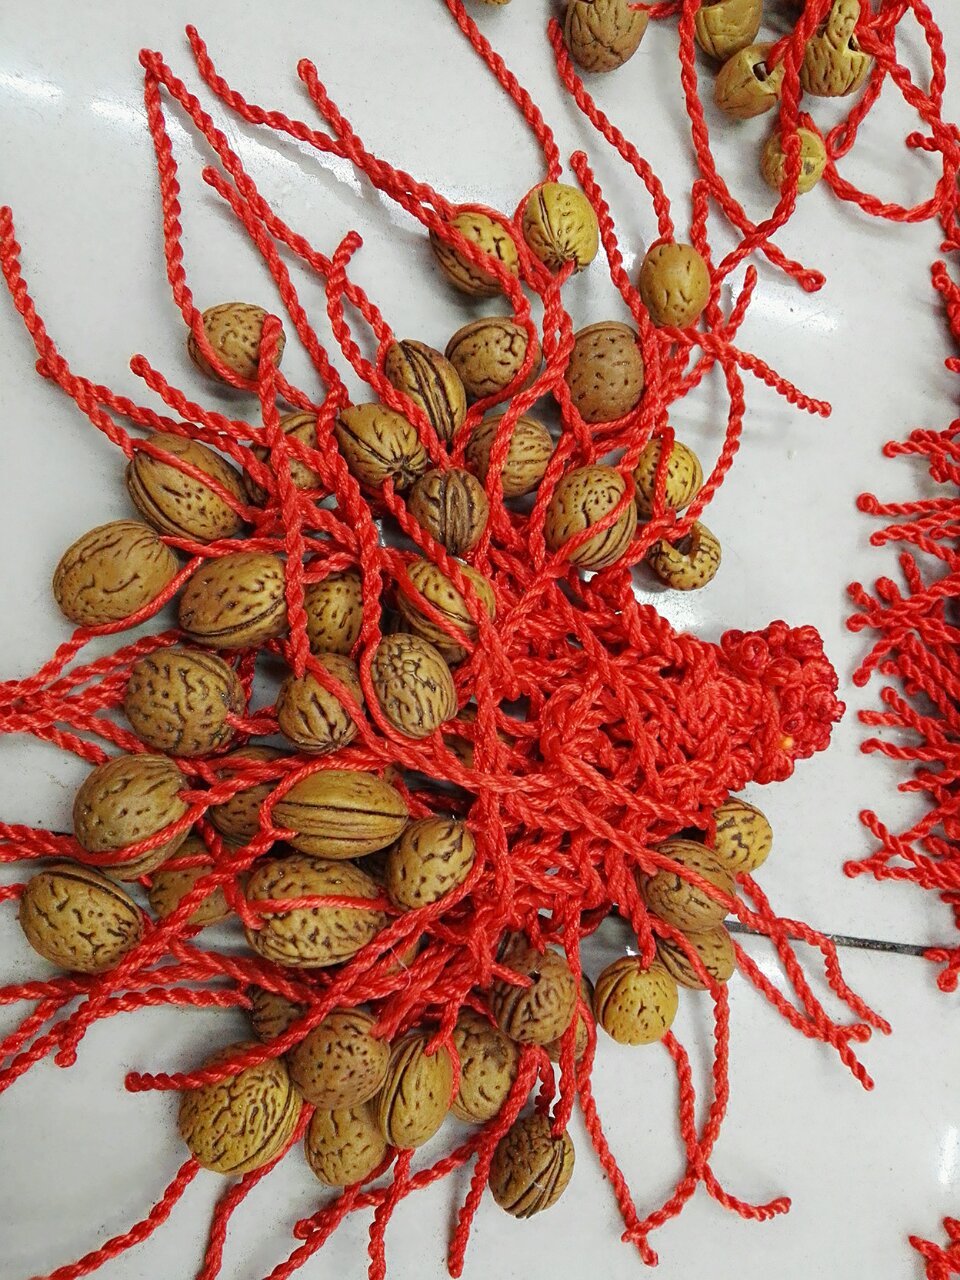 2 Yuan Store Life Red Rope Stall Peach Bracelets